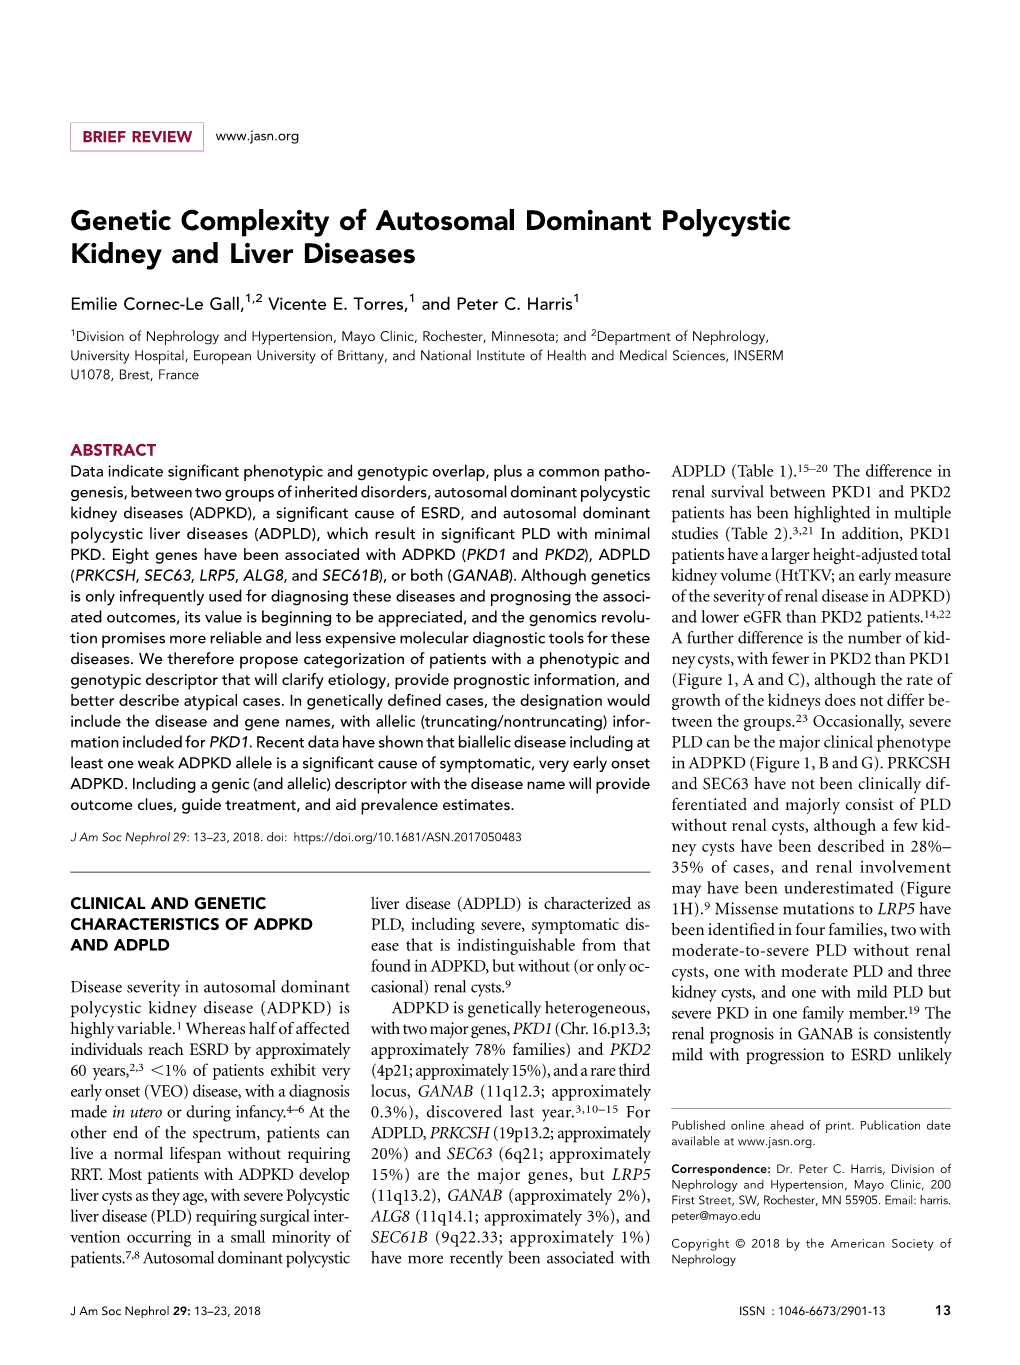 Genetic Complexity of Autosomal Dominant Polycystic Kidney and Liver Diseases